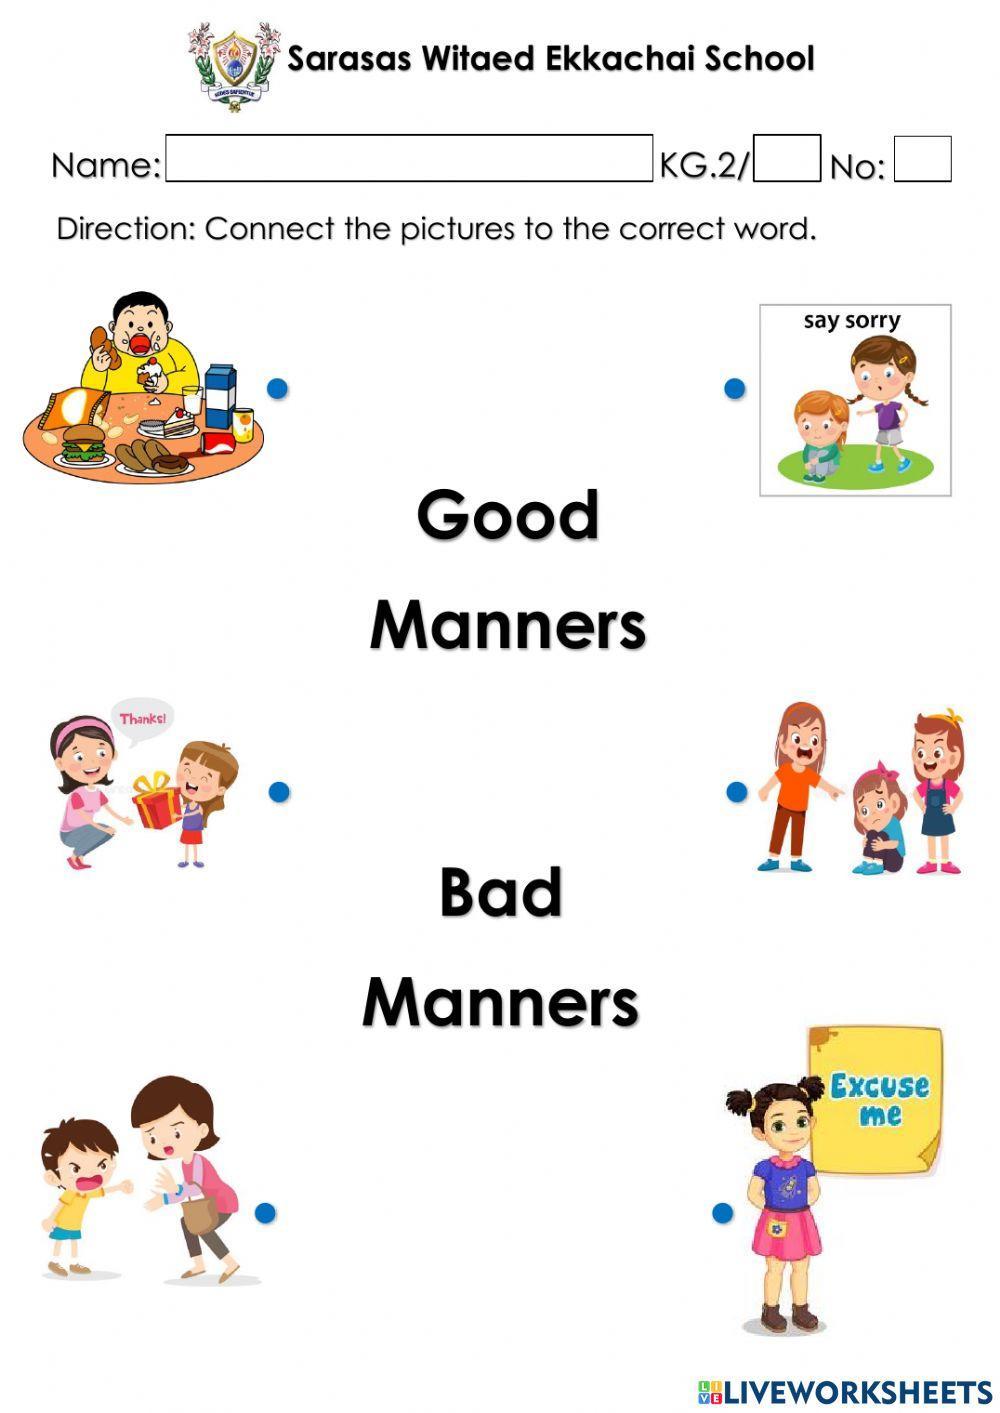 GOOD and BAD MANNERS